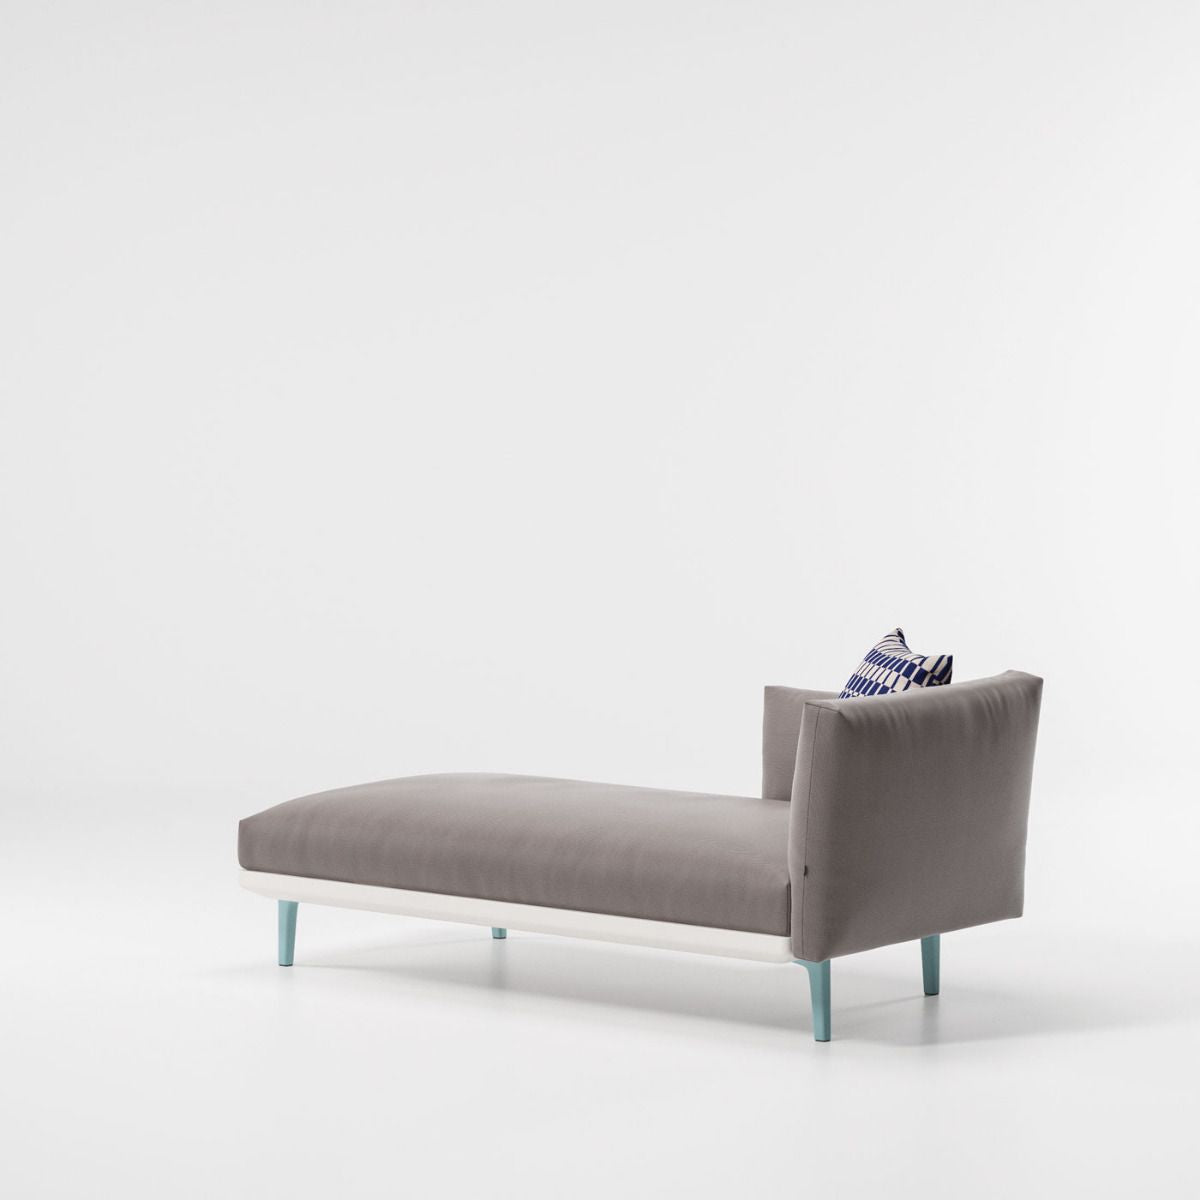 Kettal Boma Right Daybed